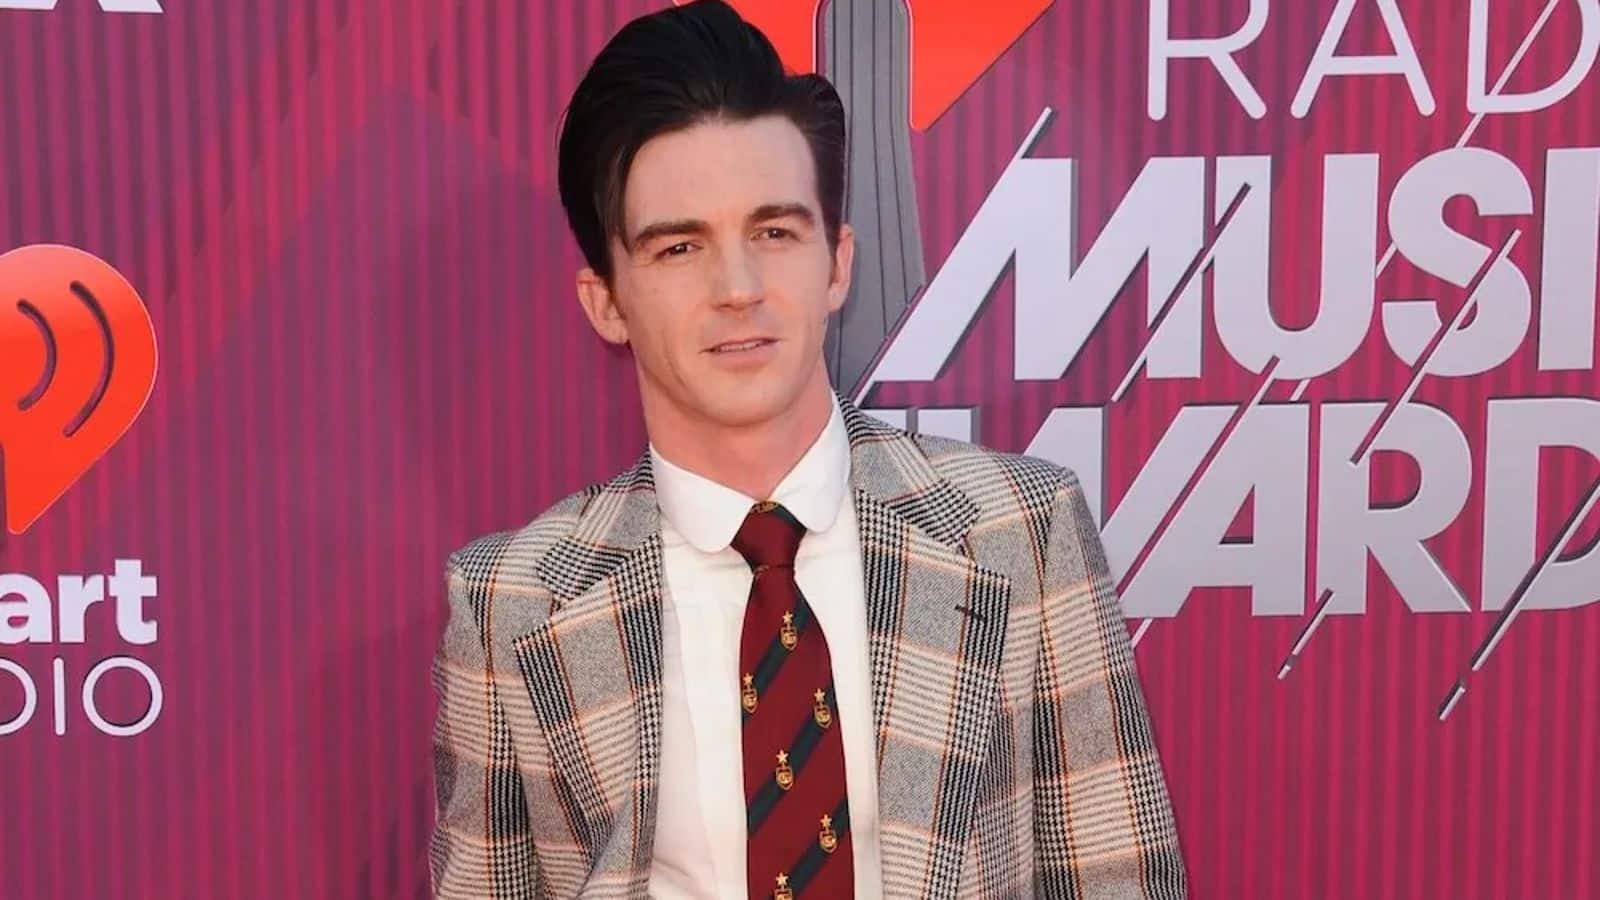 Drake Bell wrote this song based on his abuse experience 